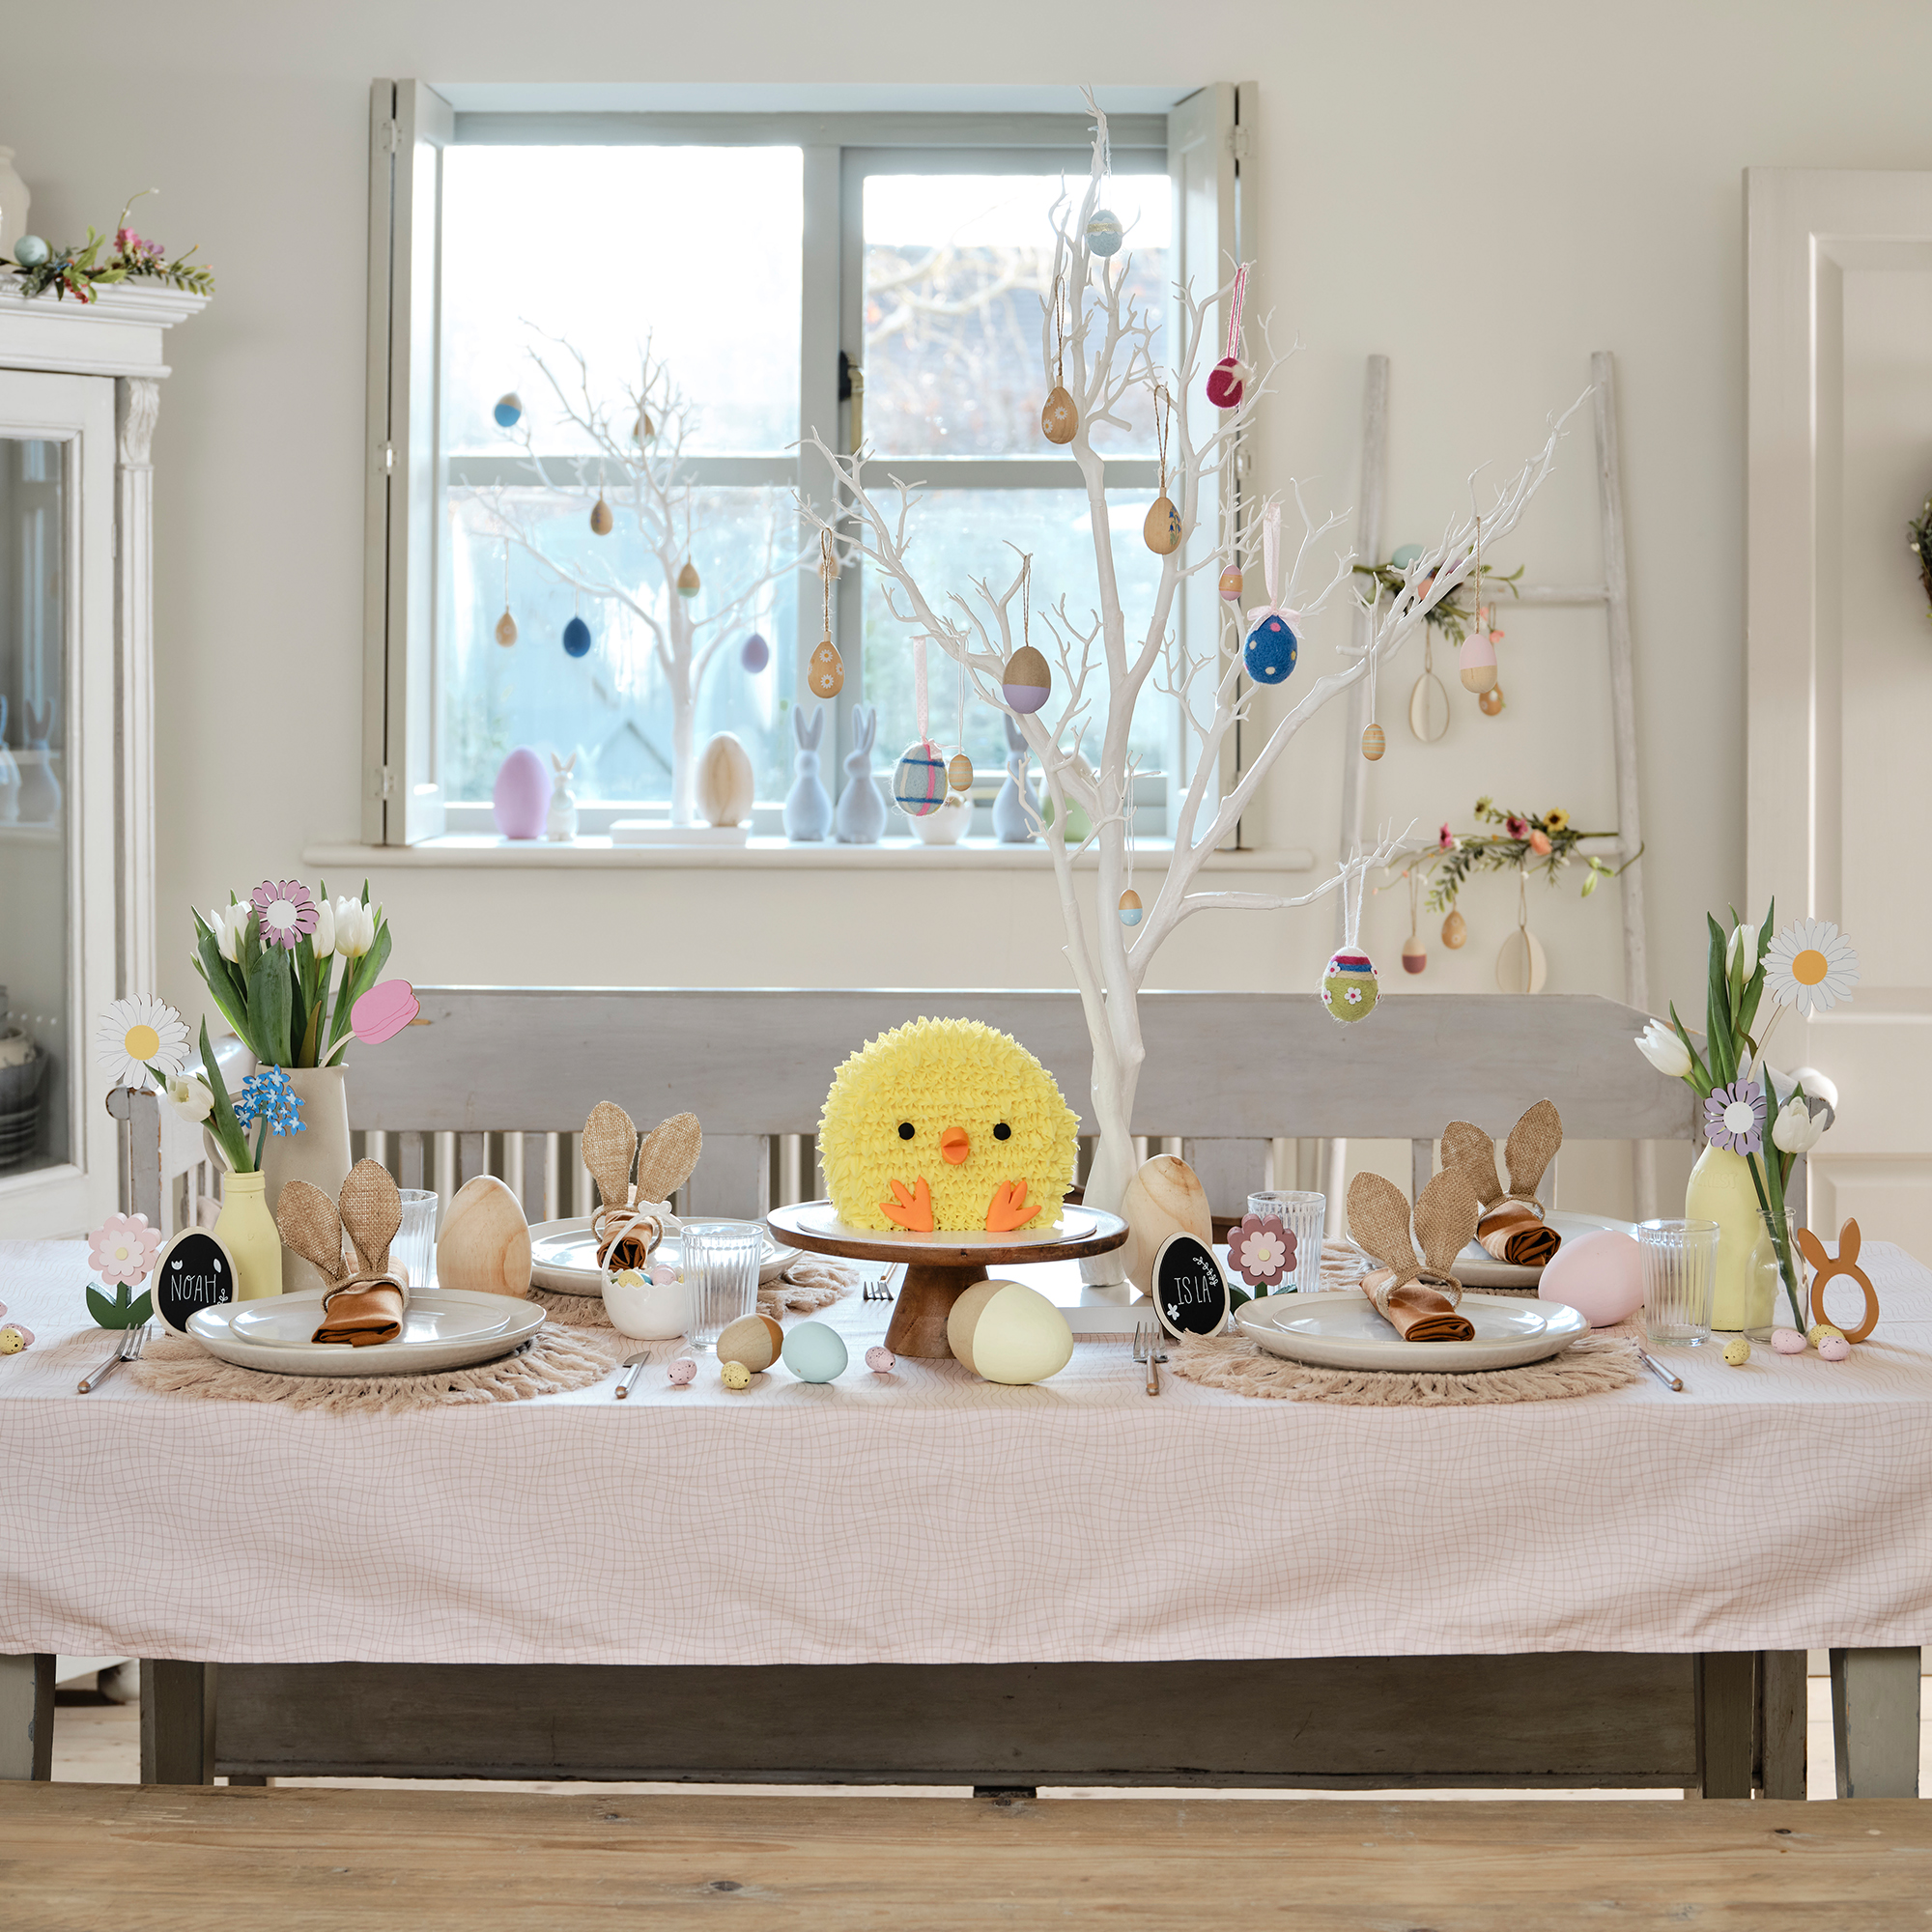 17 Table Décor Ideas to Make this Easter | Hobbycraft